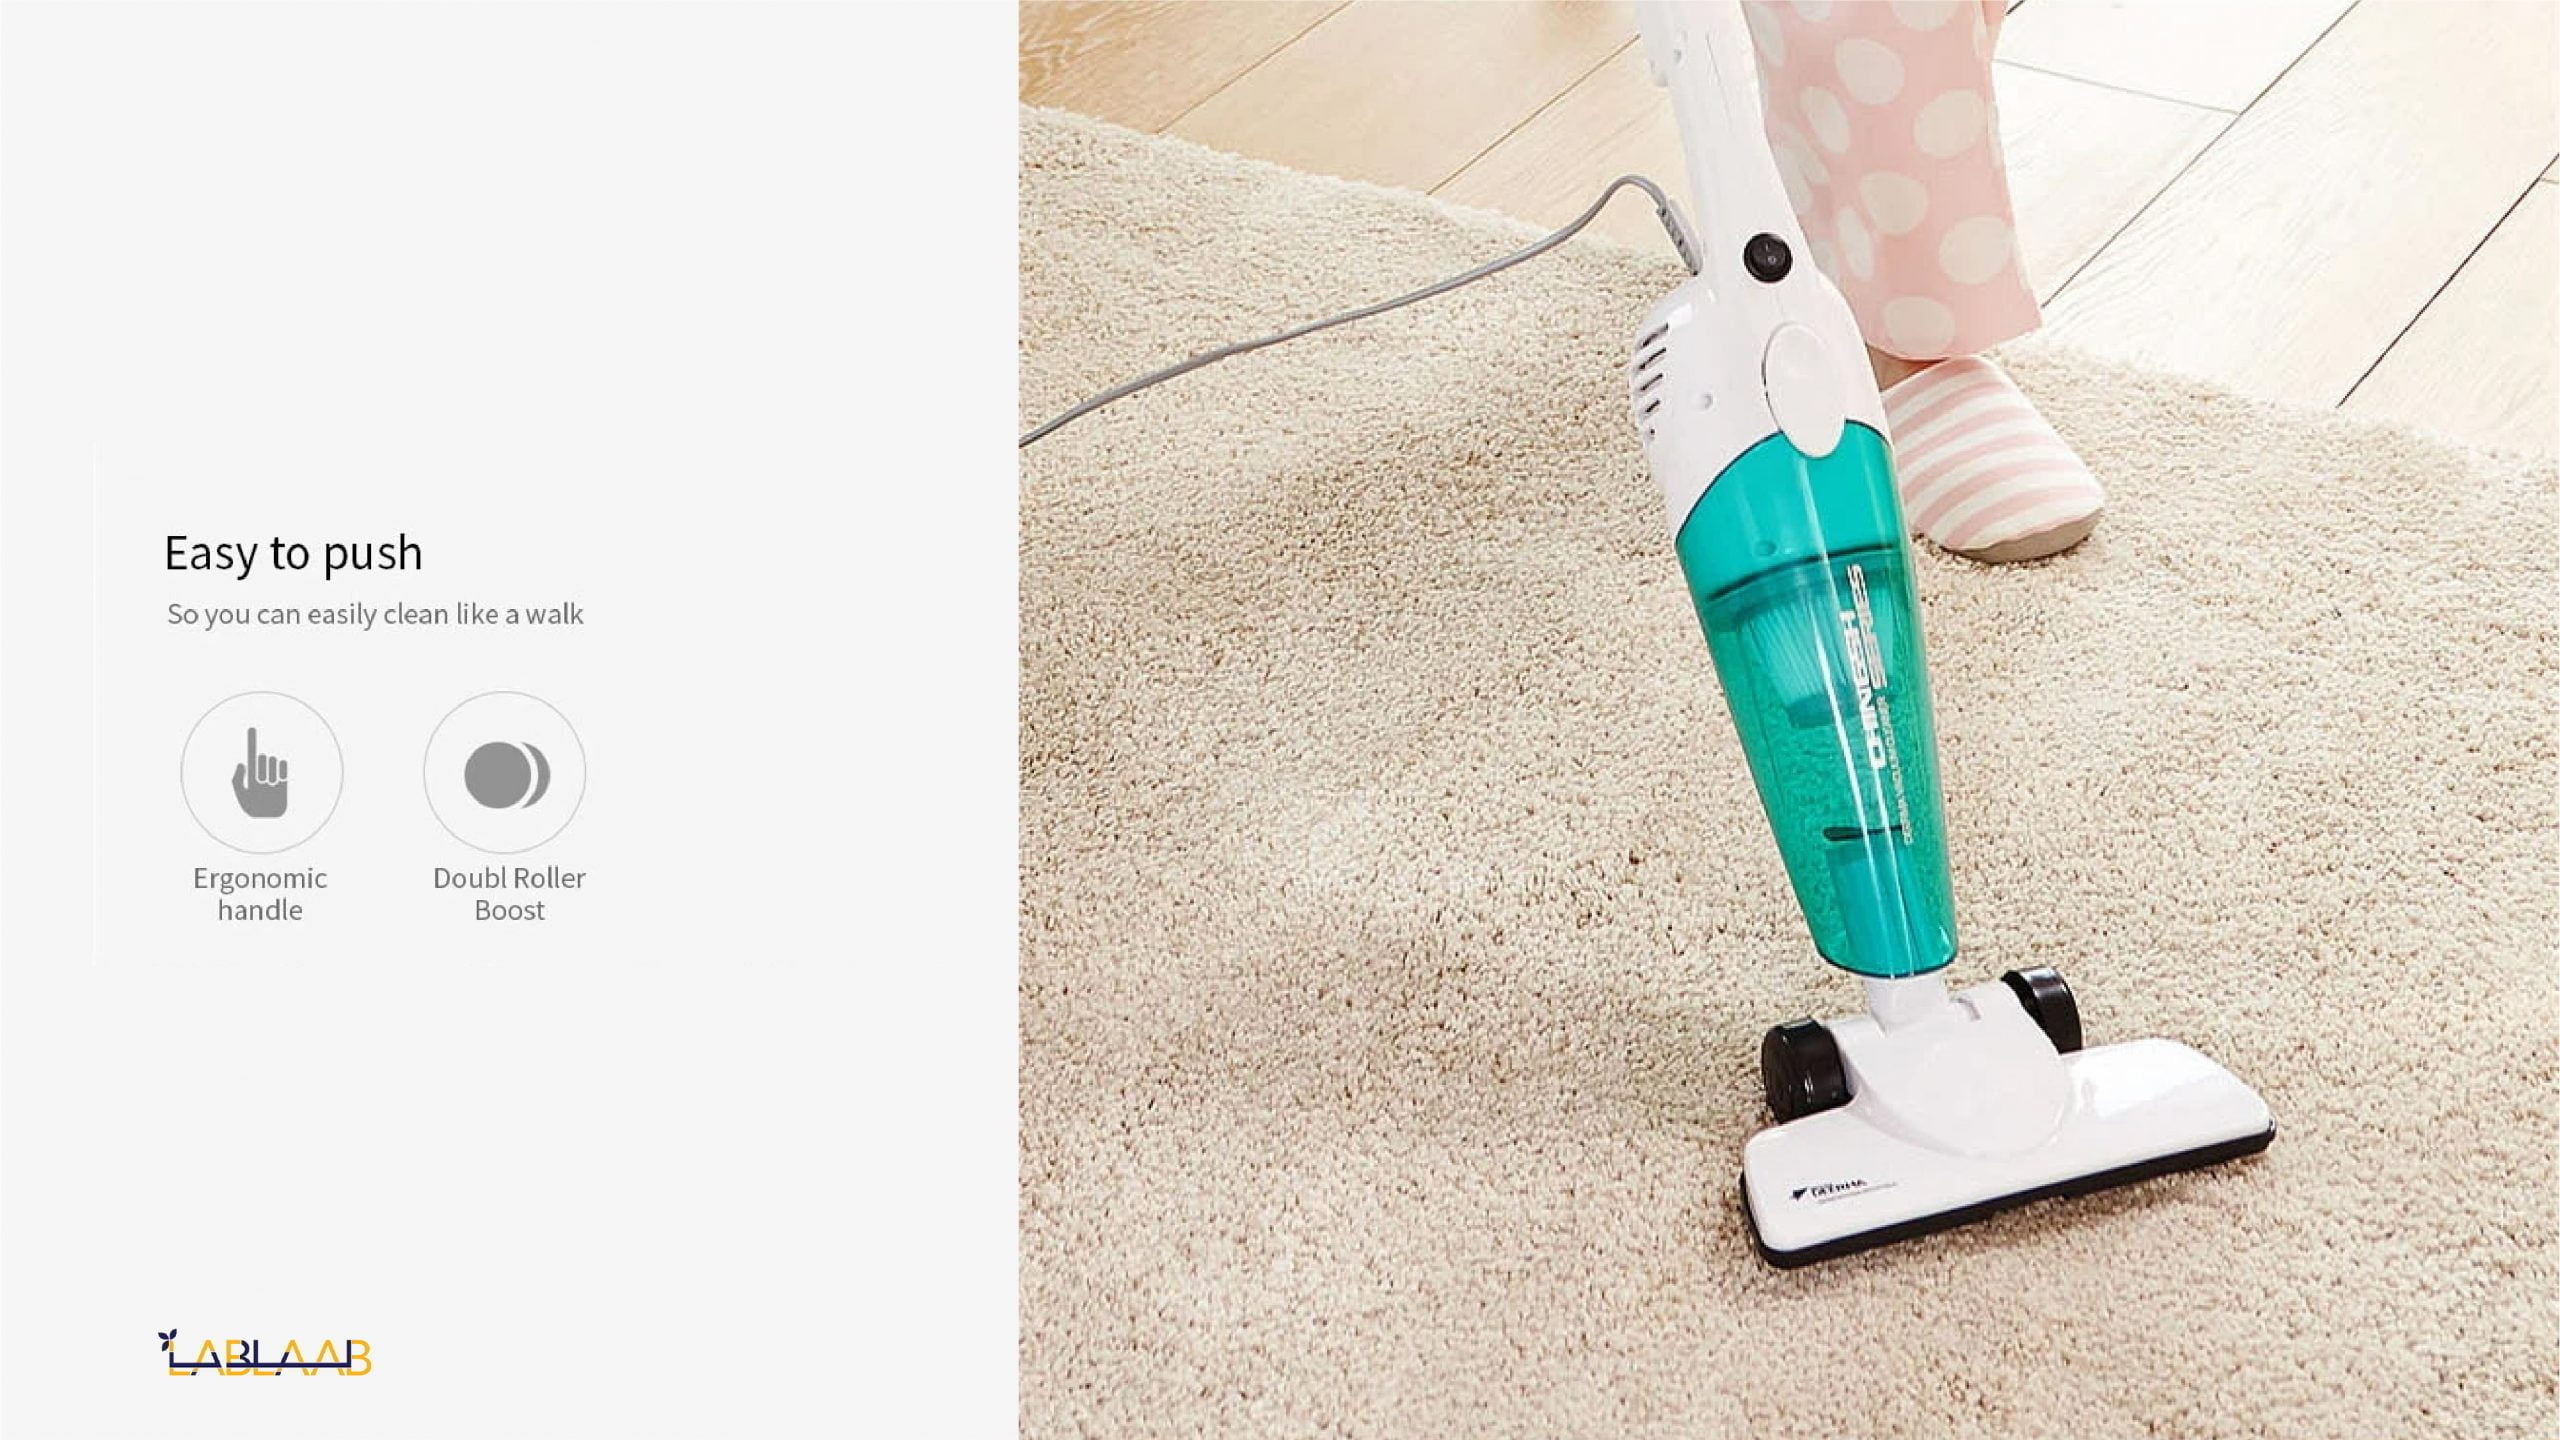 Vacuum 333 06 Scaled Xiaomi Deerma Dx118C Upright Vacuum Cleaner Mini 2-In-1 Pushrod Handheld Cleaner With 16000Pa Super Suction- Green Https://Www.youtube.com/Watch?V=A4_Ujrhyw_I Deerma Dx118C Vacuum Cleaner Deerma Dx118C Vacuum Cleaner 2-In-1 Pushrod Handheld Cleaner With 16000Pa Super Suction